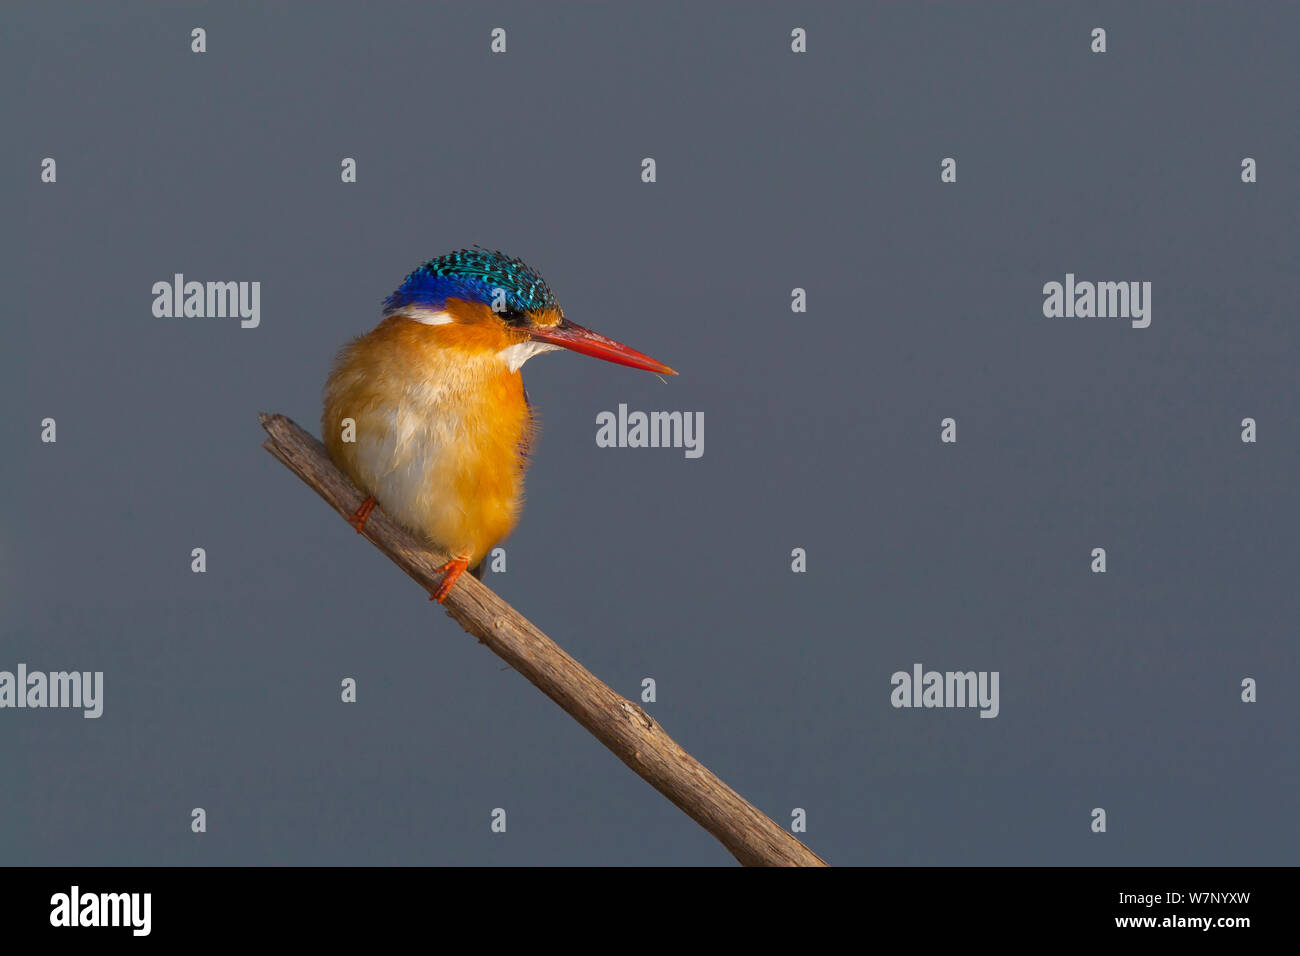 Malachite Kingfisher (Alcedo christata) perched on a reed at Marievale Bird Sanctuary, Gauteng, South Africa, August Stock Photo